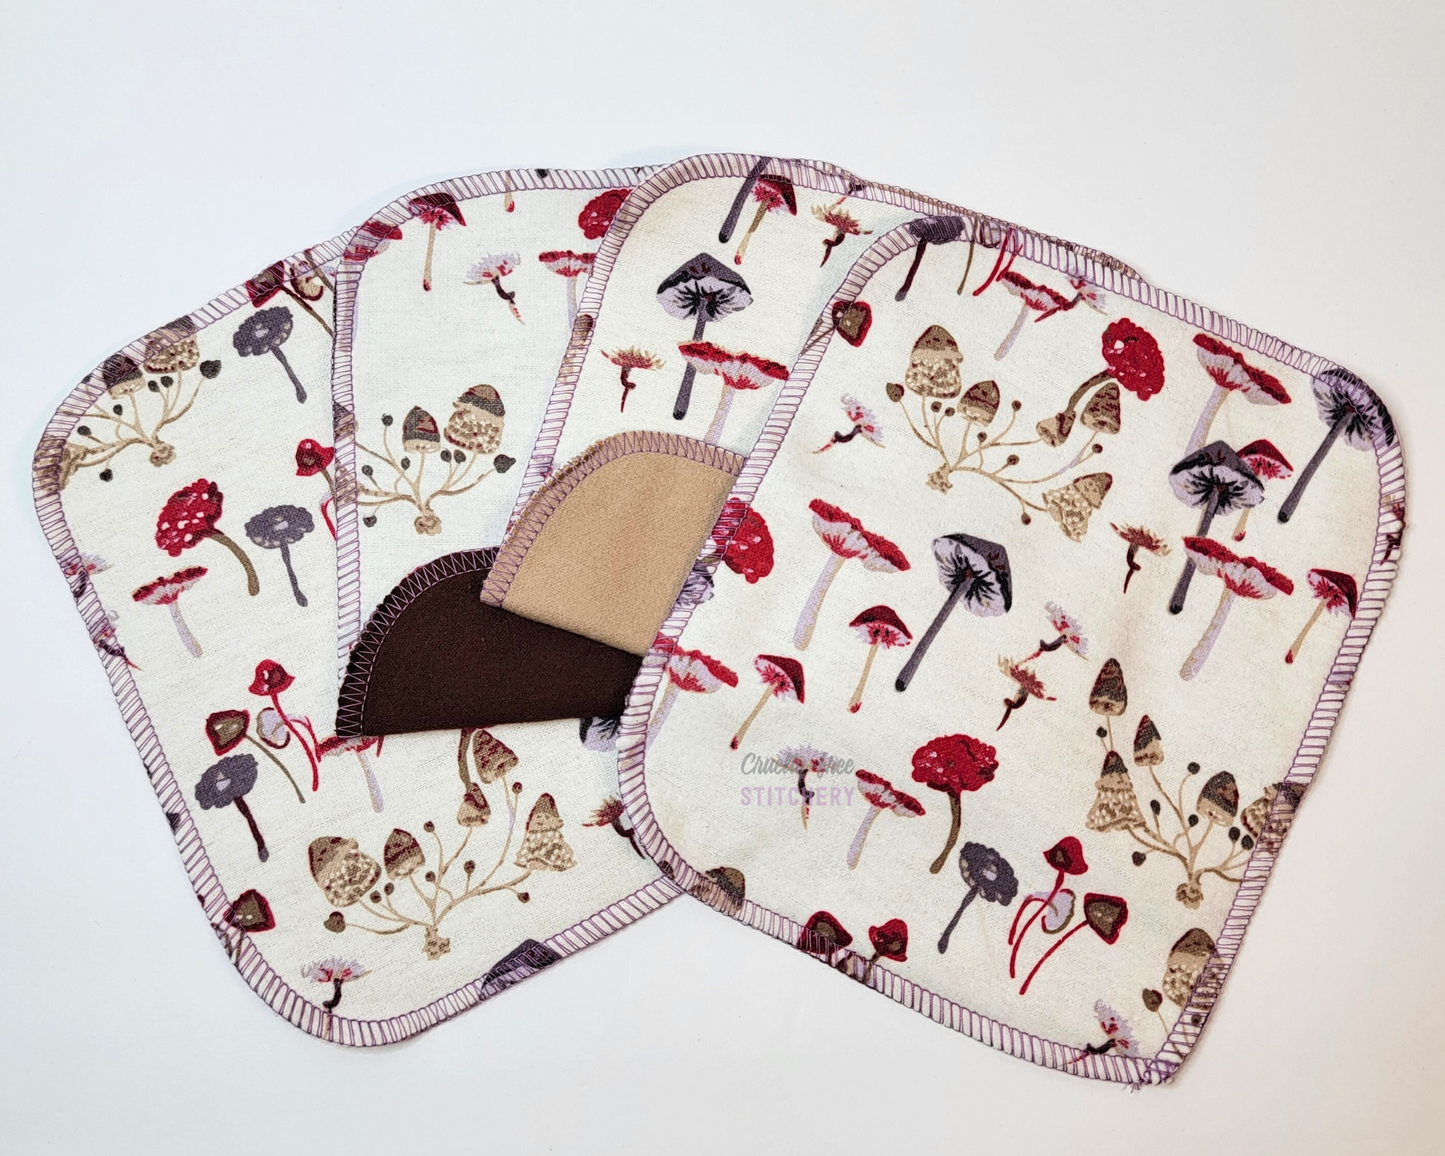 Four mushroom print cloth wipes laid out in a fan shape, the two in the center are folded up to show the back is tan or dark brown. The mushroom print is a white background with wild mushrooms in shades of reds, browns, and purples.